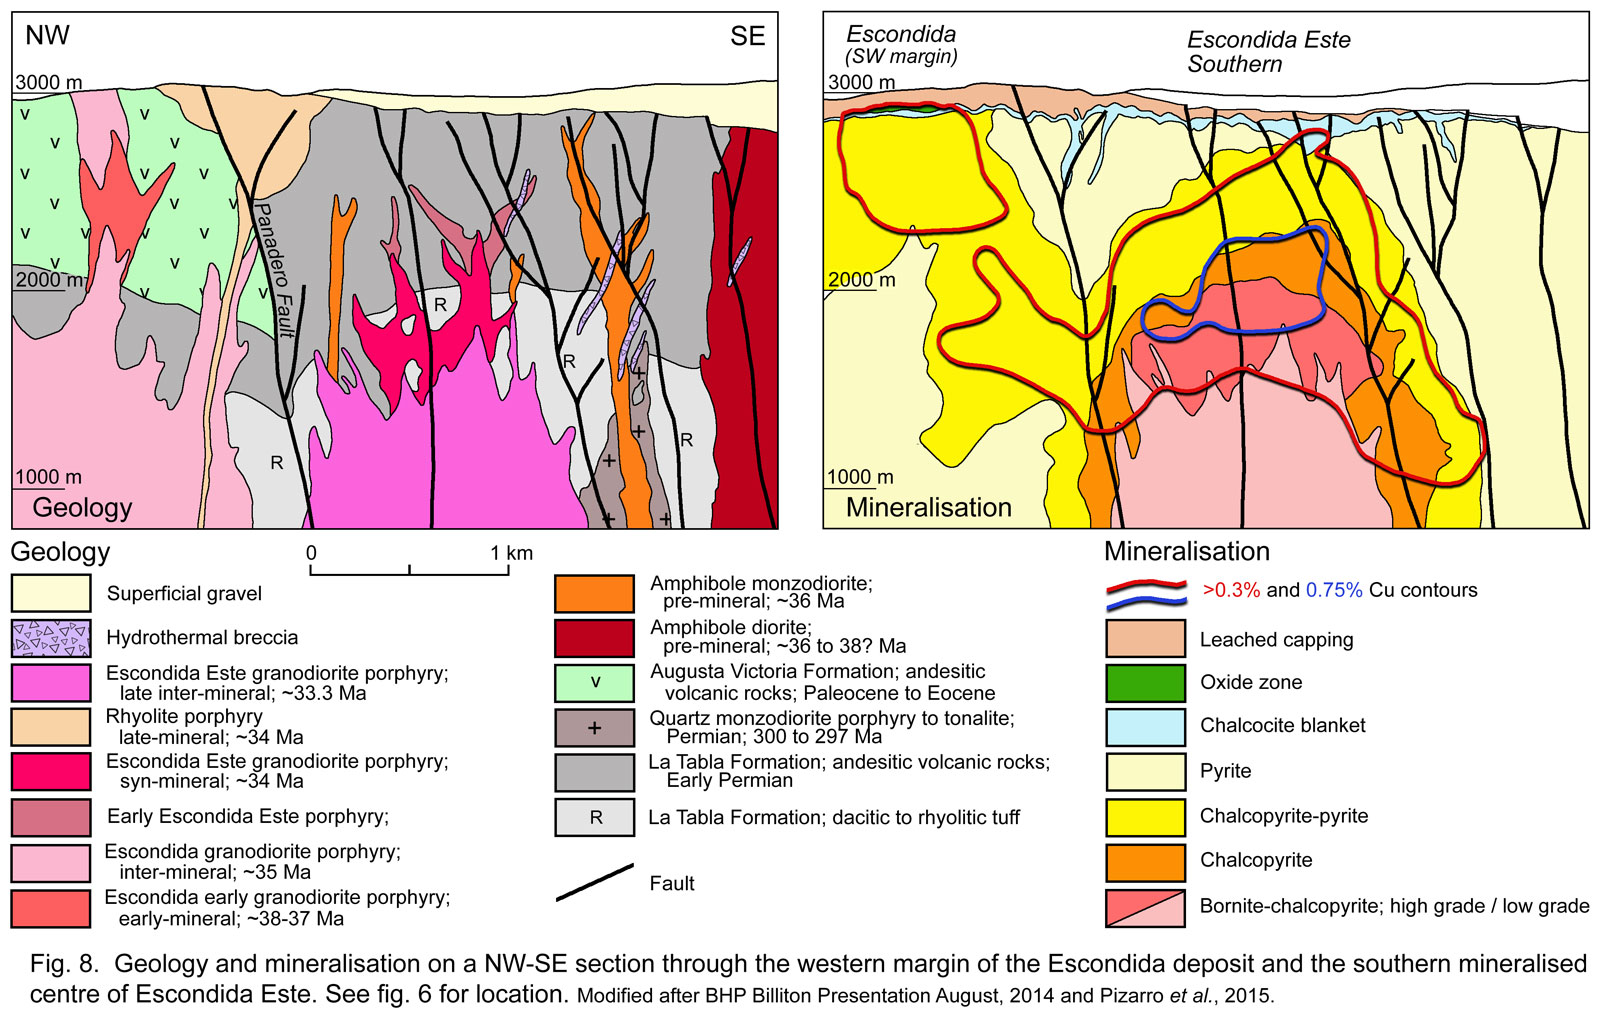 Escondida Este Southern Centre Geology alteration mineralisation cross section